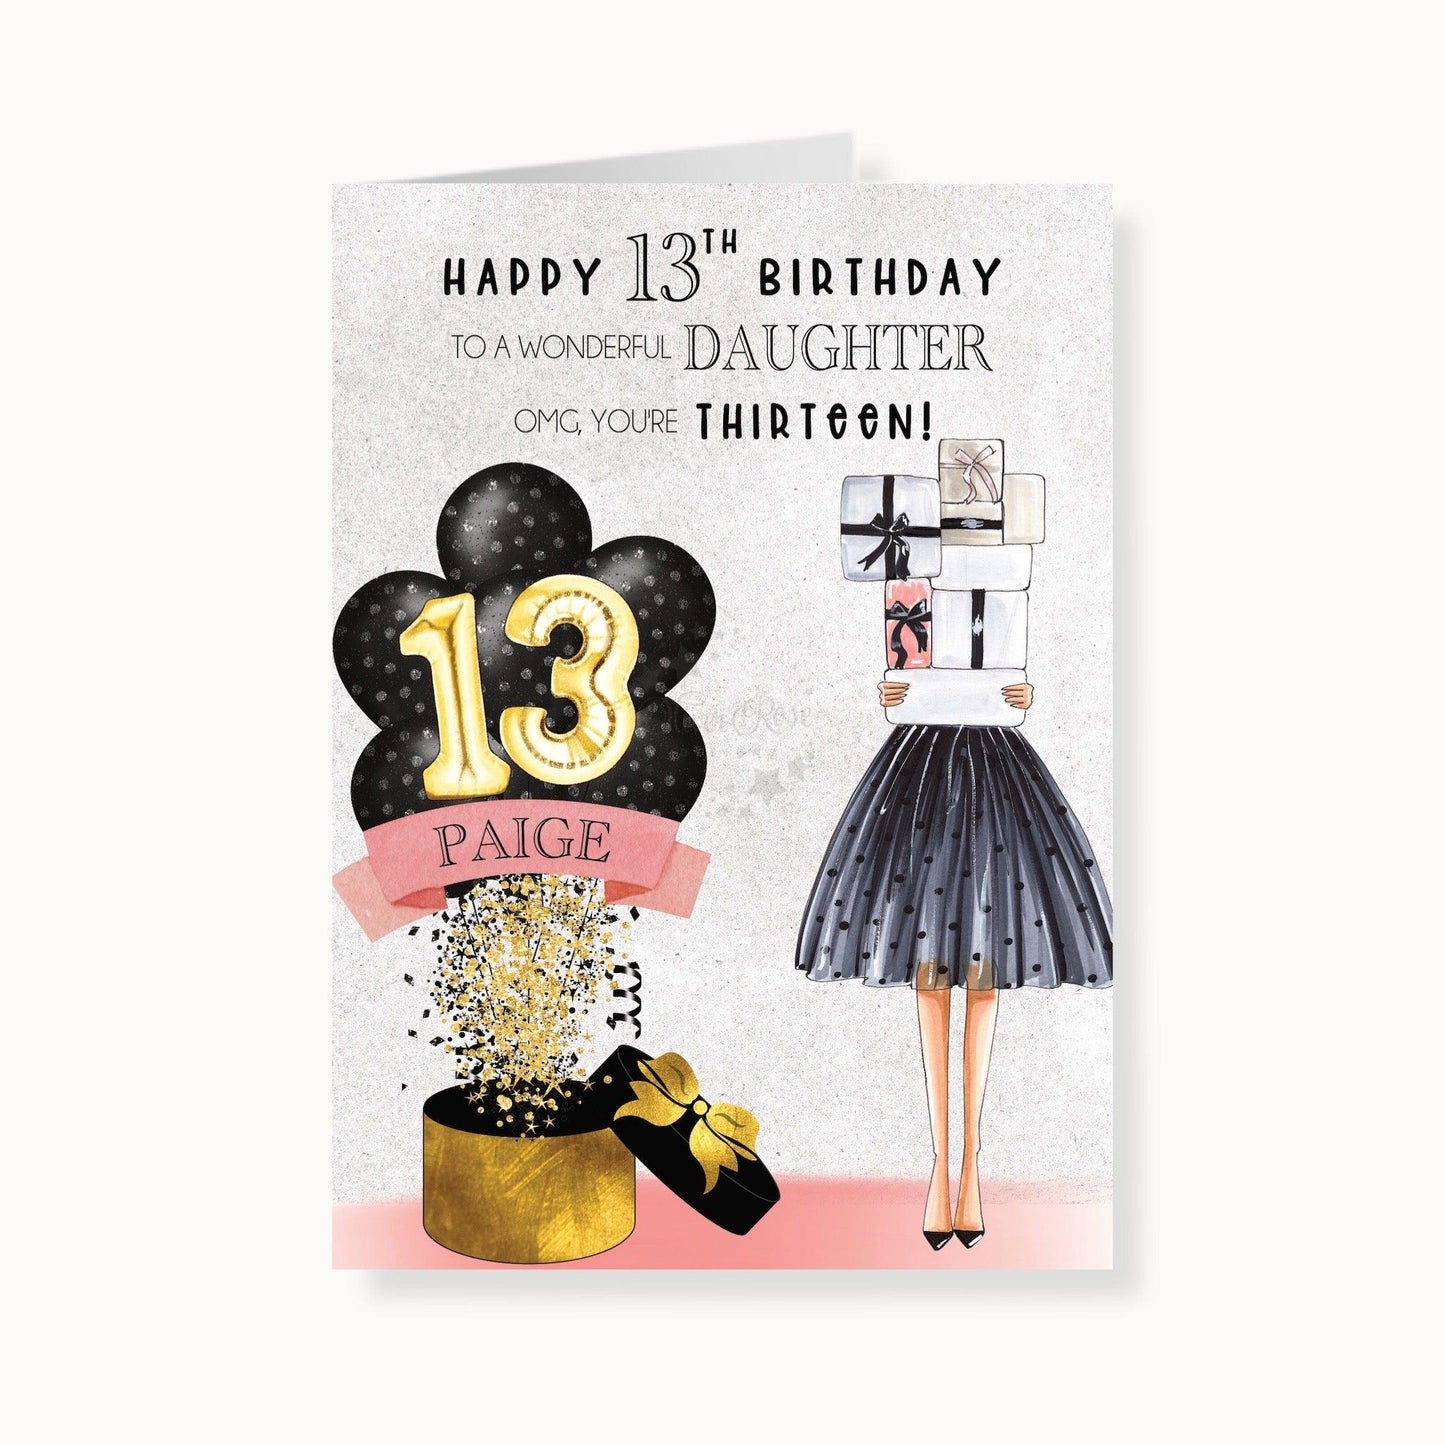 Polka Dot Balloons 13th Birthday Card, Personalised with Name of your choice, To A Wonderful Daughter, OMG You're Thirteen, Black Polka Dot Balloons with Girl holding gifts wearing a black polka dot skirt